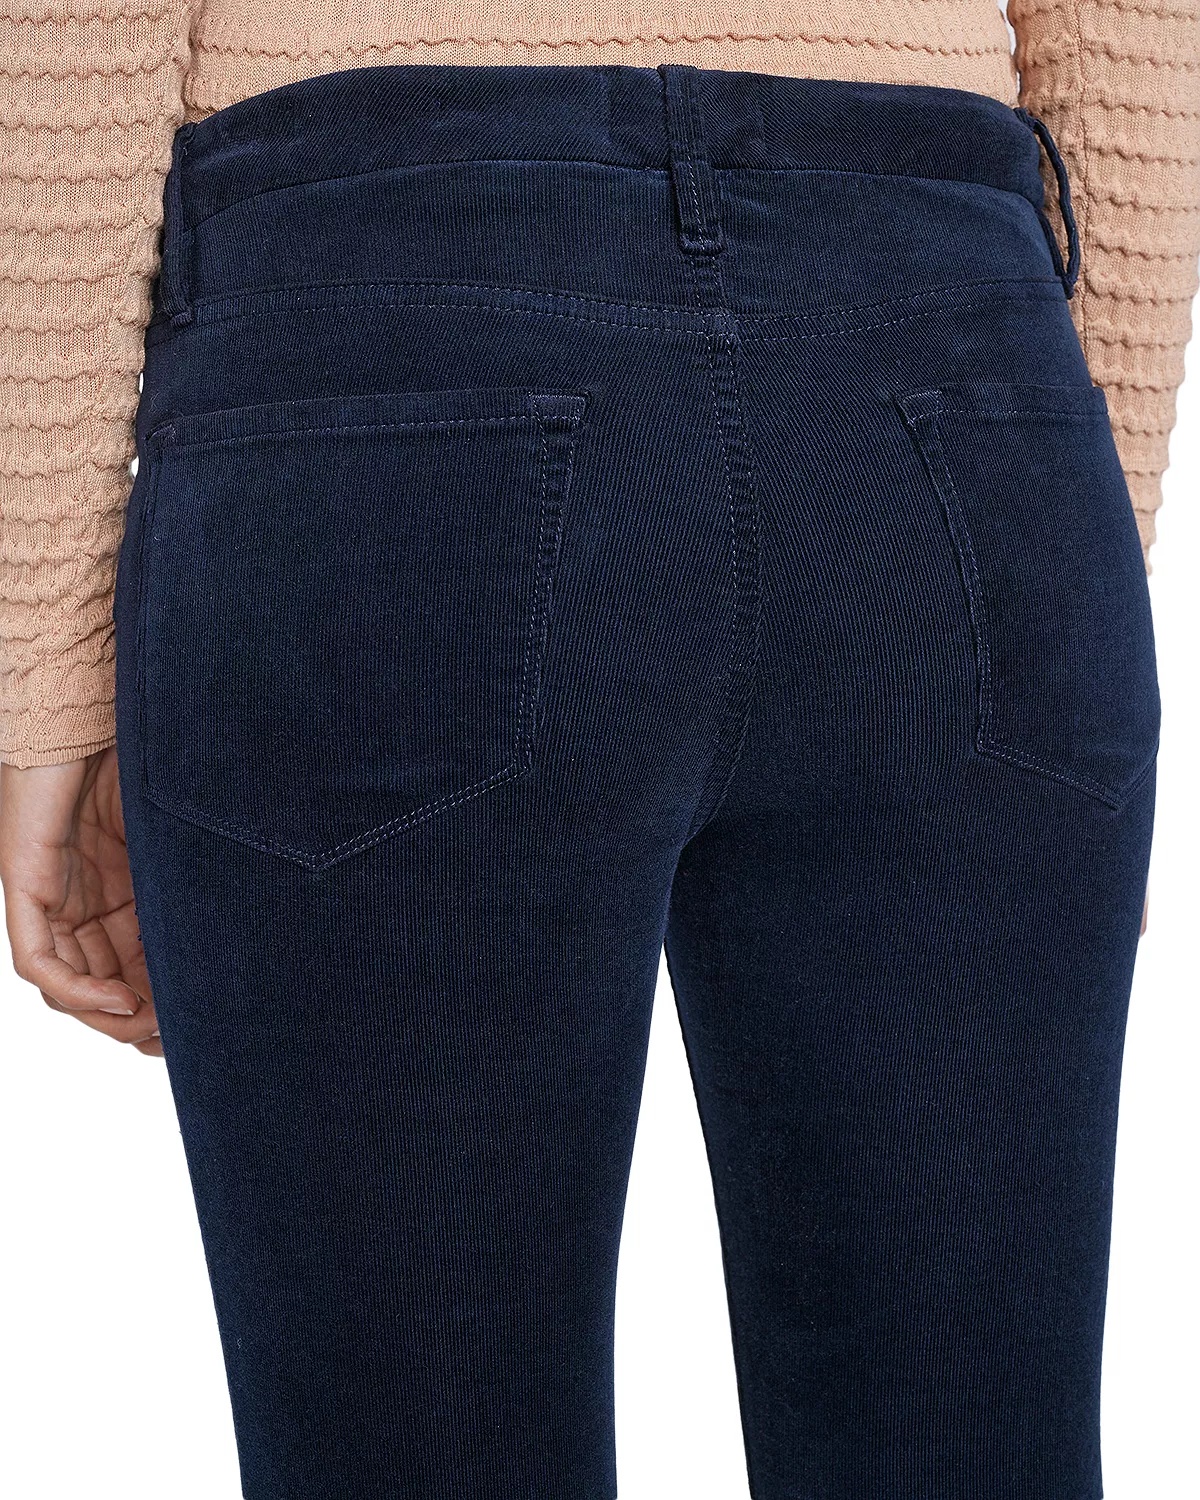 Le Mini High Rise Bootcut Jeans in Navy - 5